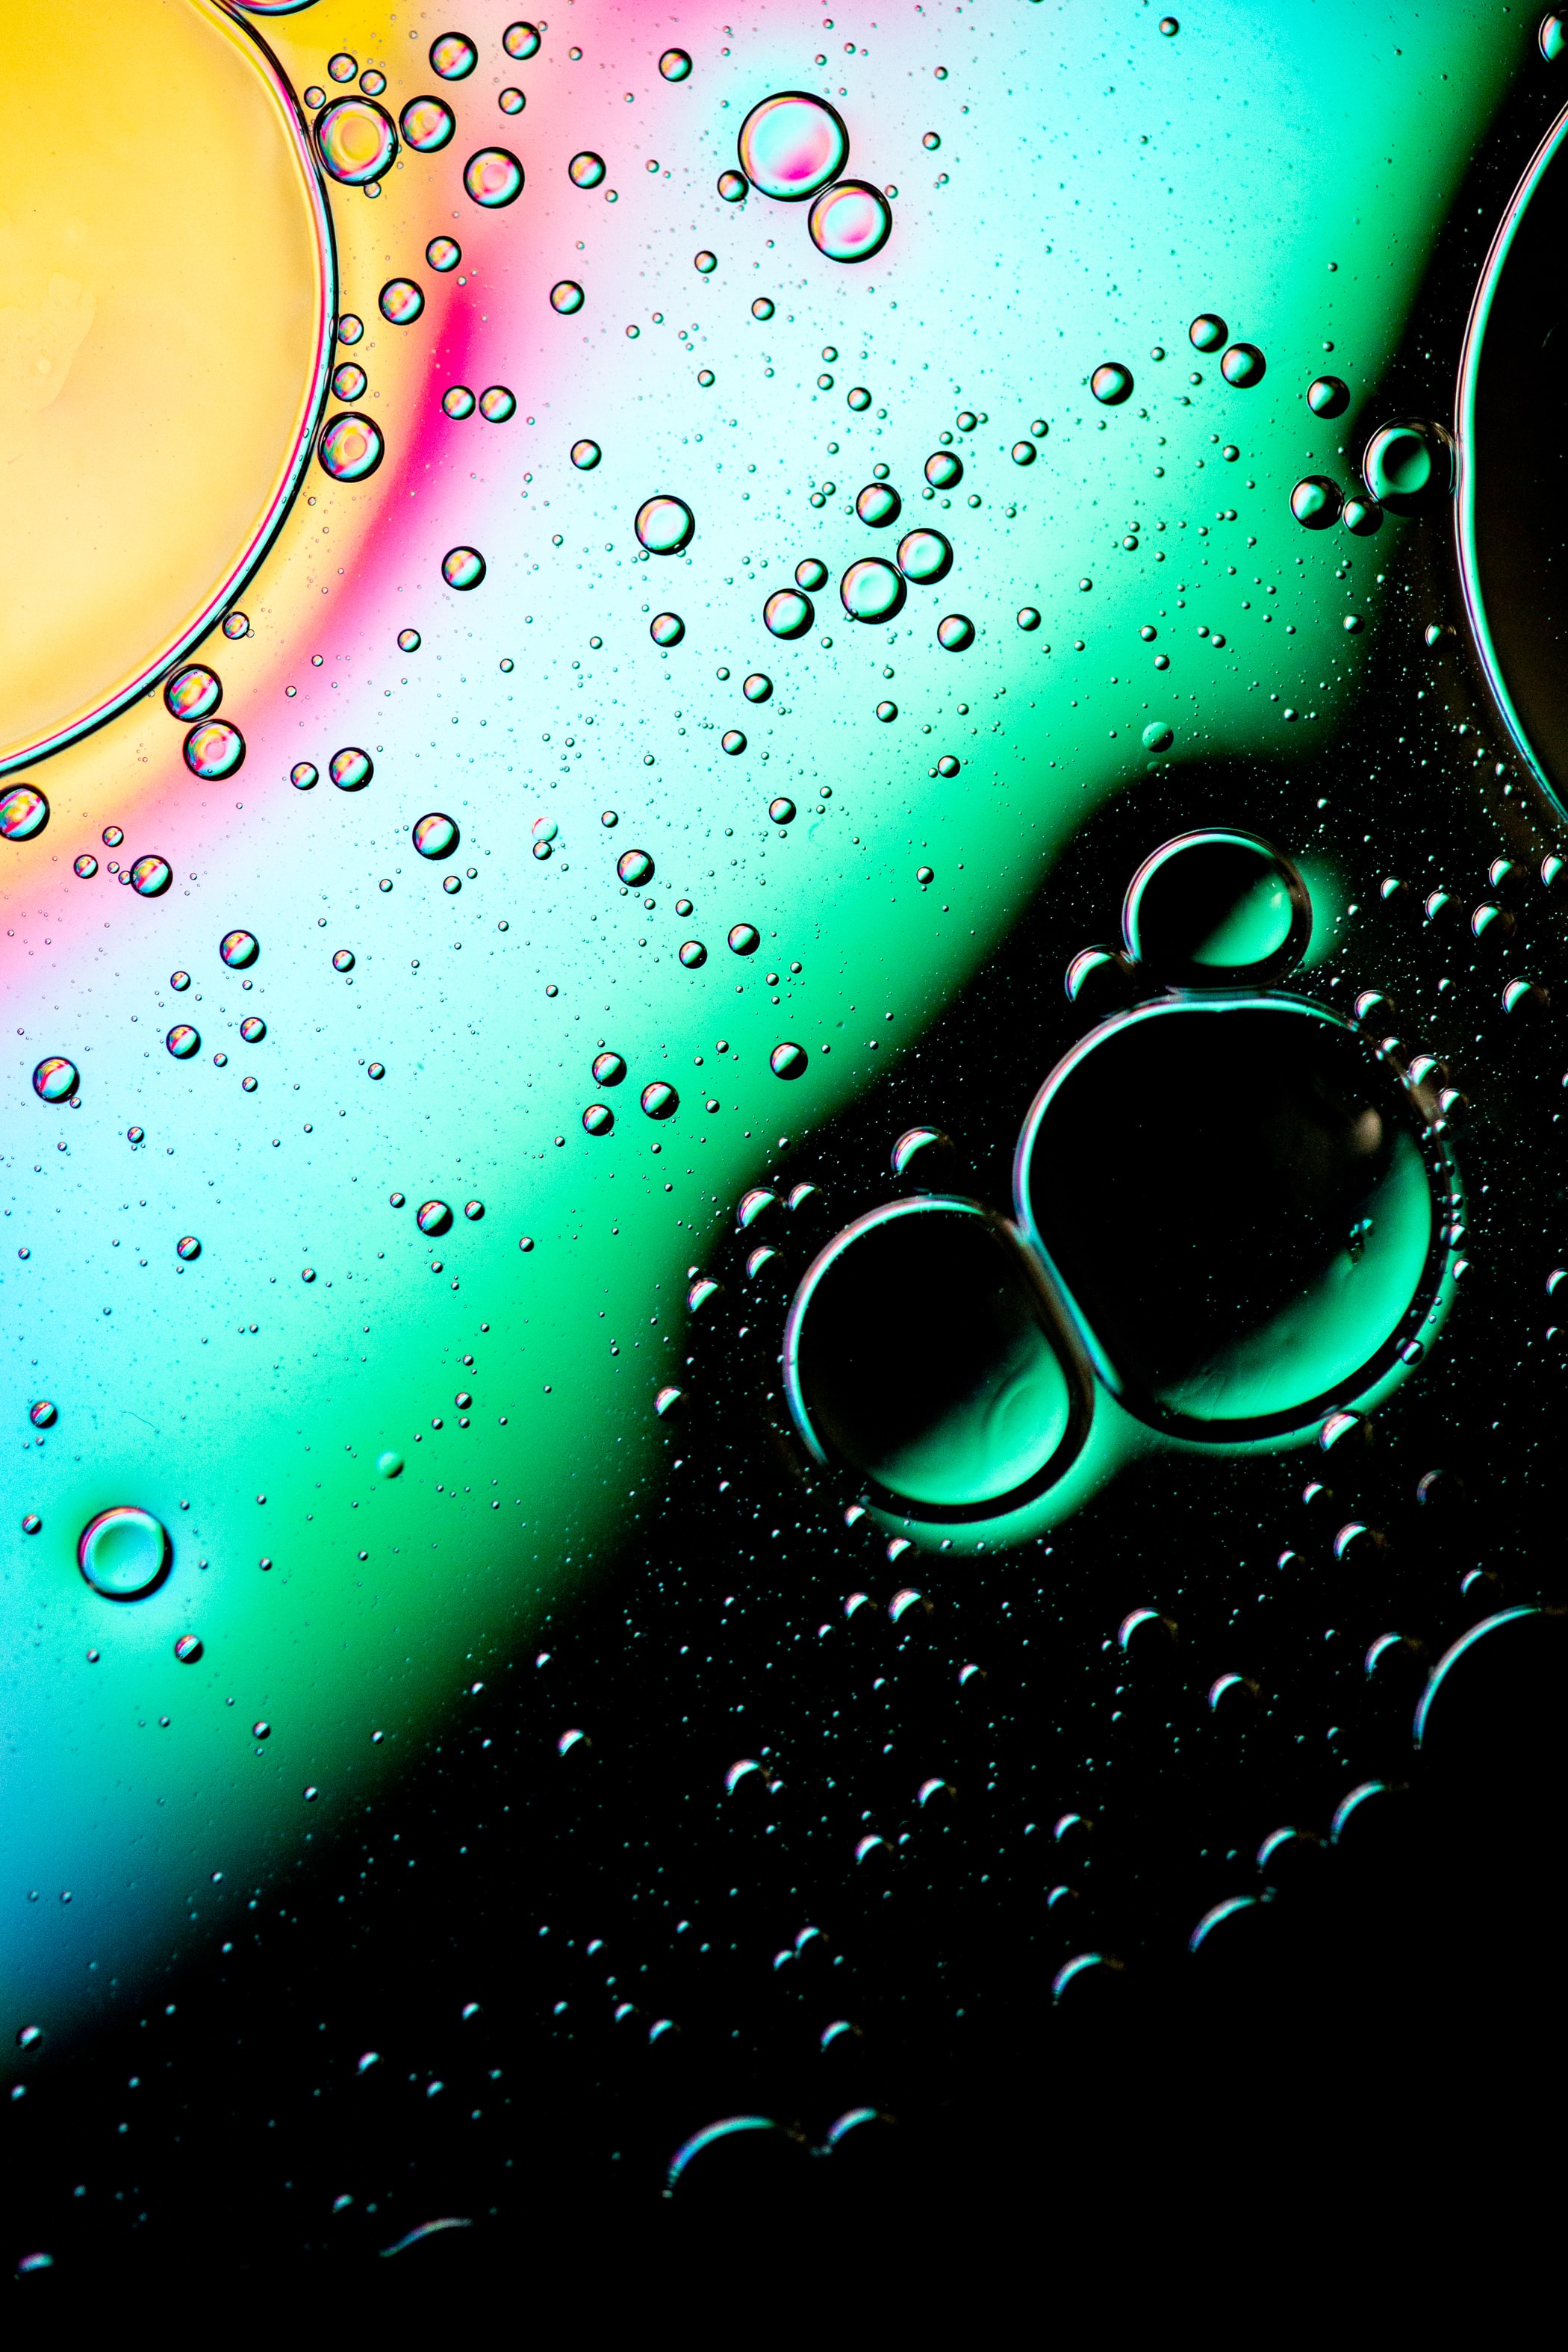 multicolored, abstract, water, bubbles, drops, motley, gradient FHD, 4K, UHD